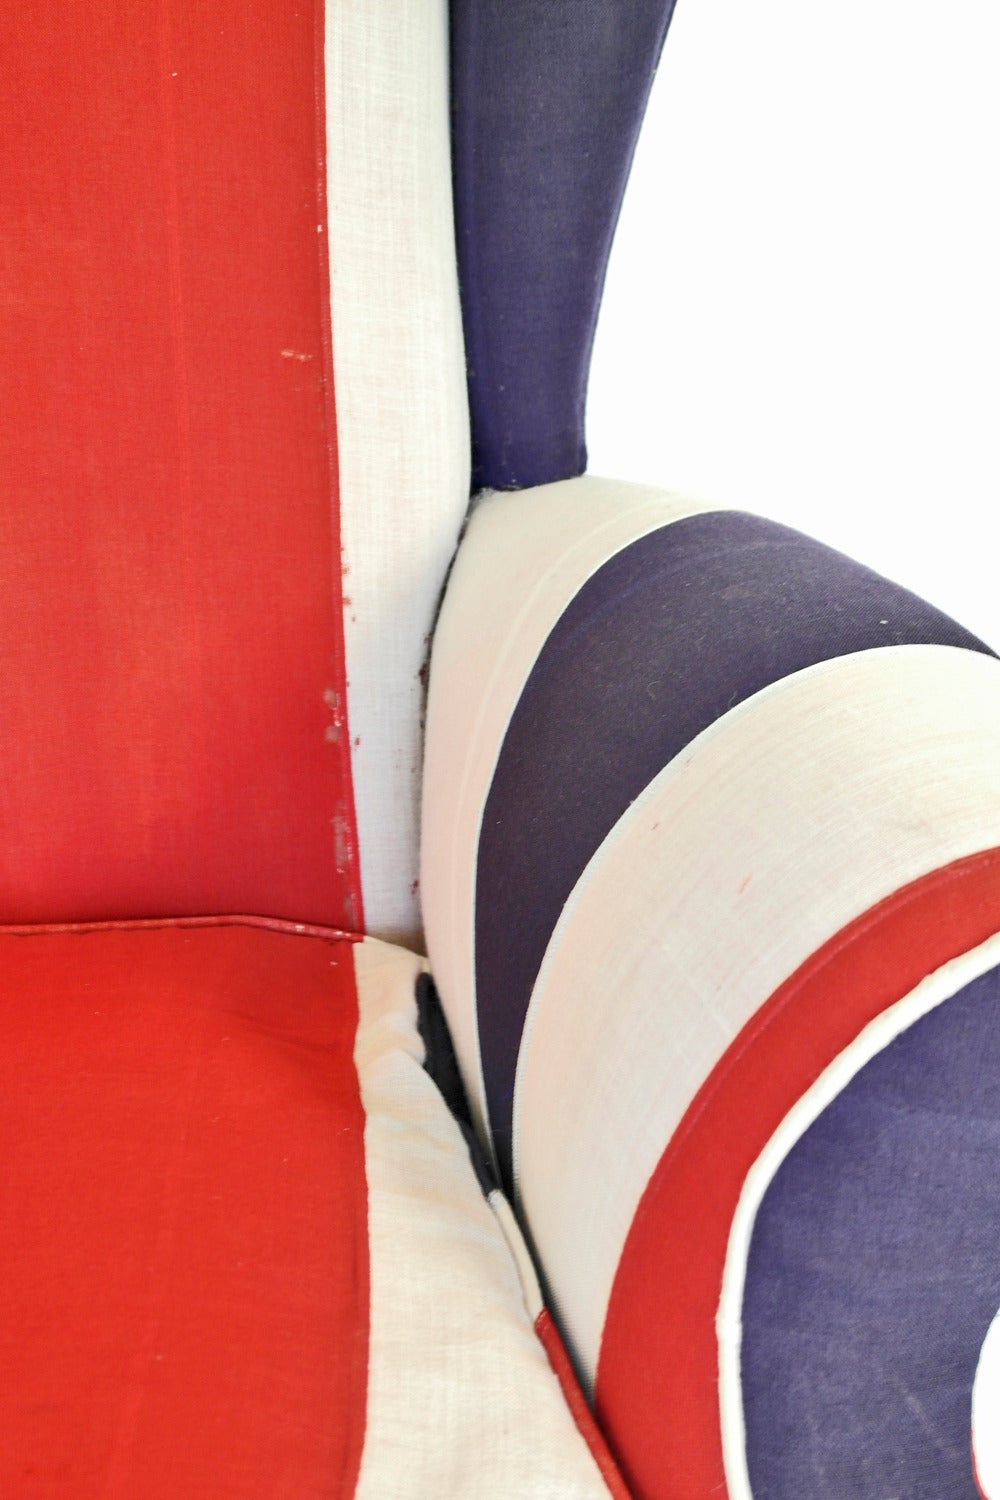 English Union Jack Upholstered Queen Anne Wing Back Chair For Sale